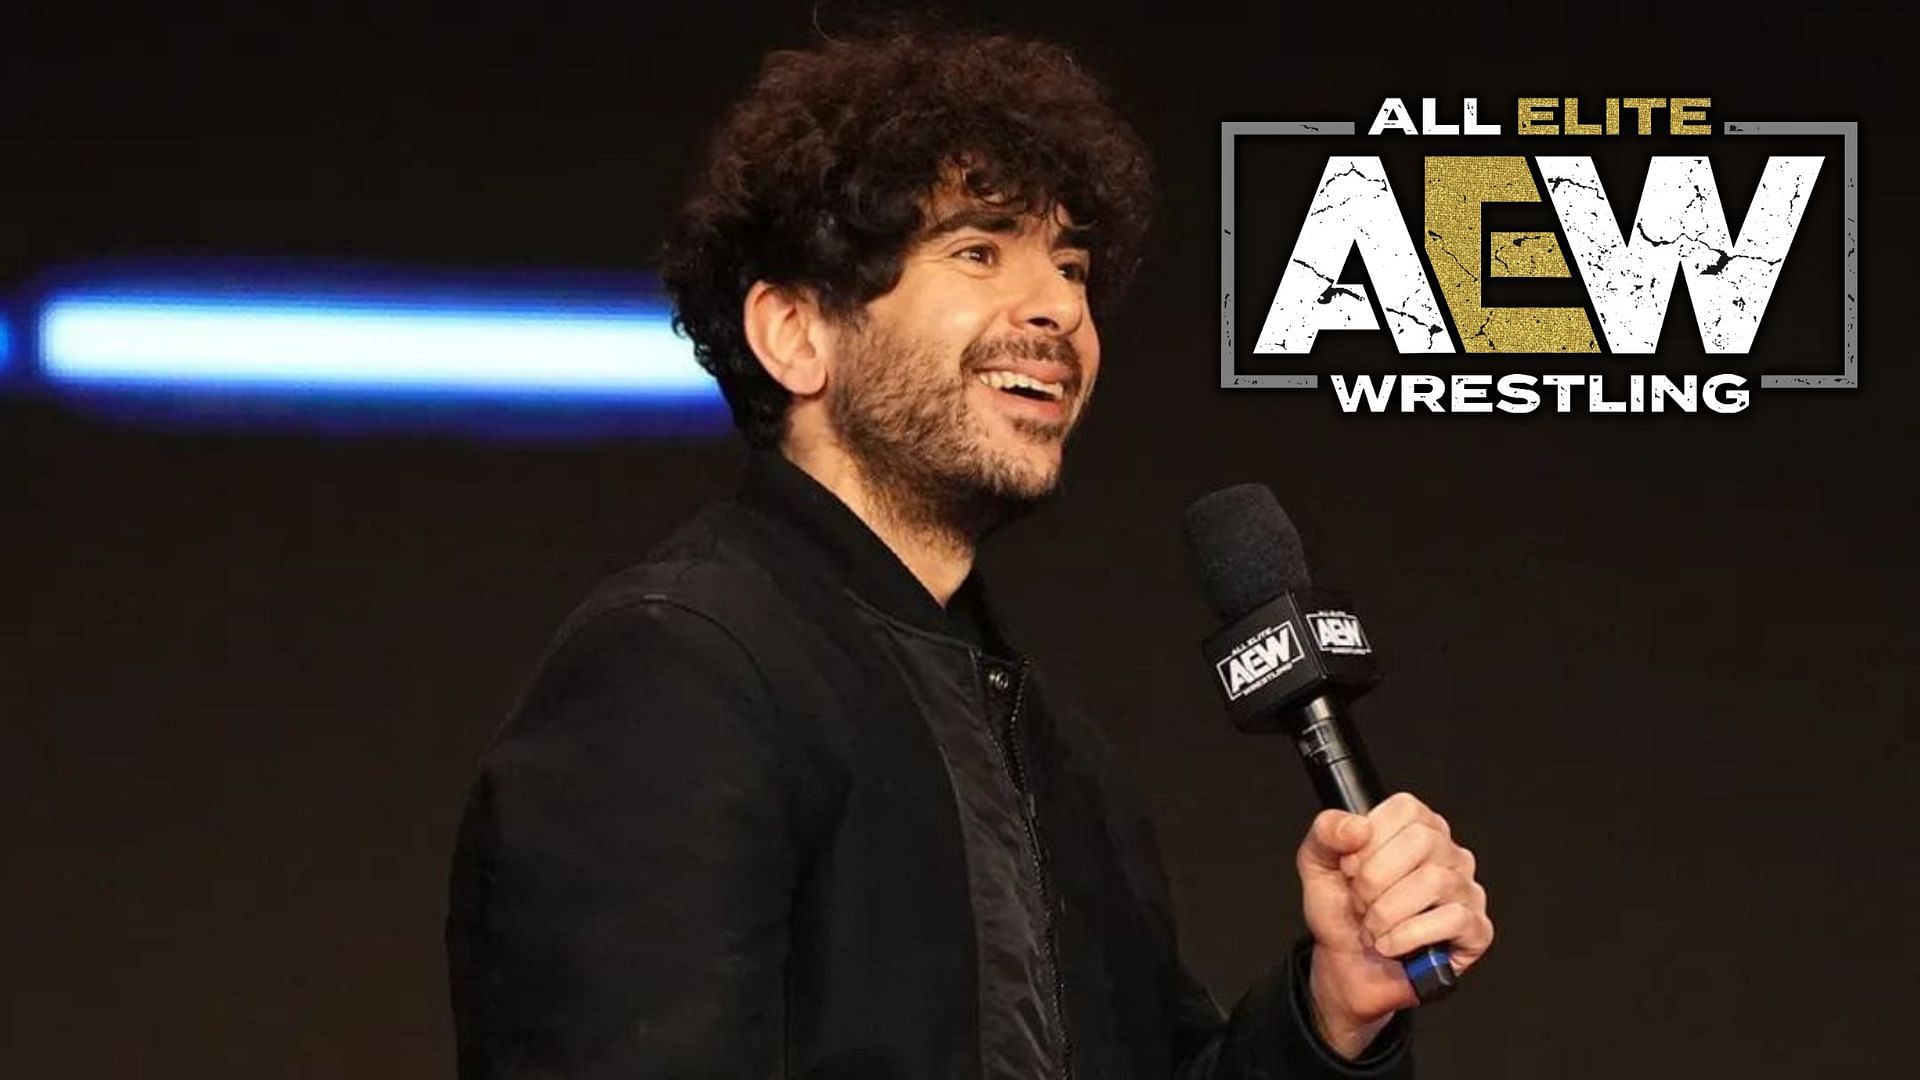 Tony Khan should announce this major signing during tonight's AEW Dynamite